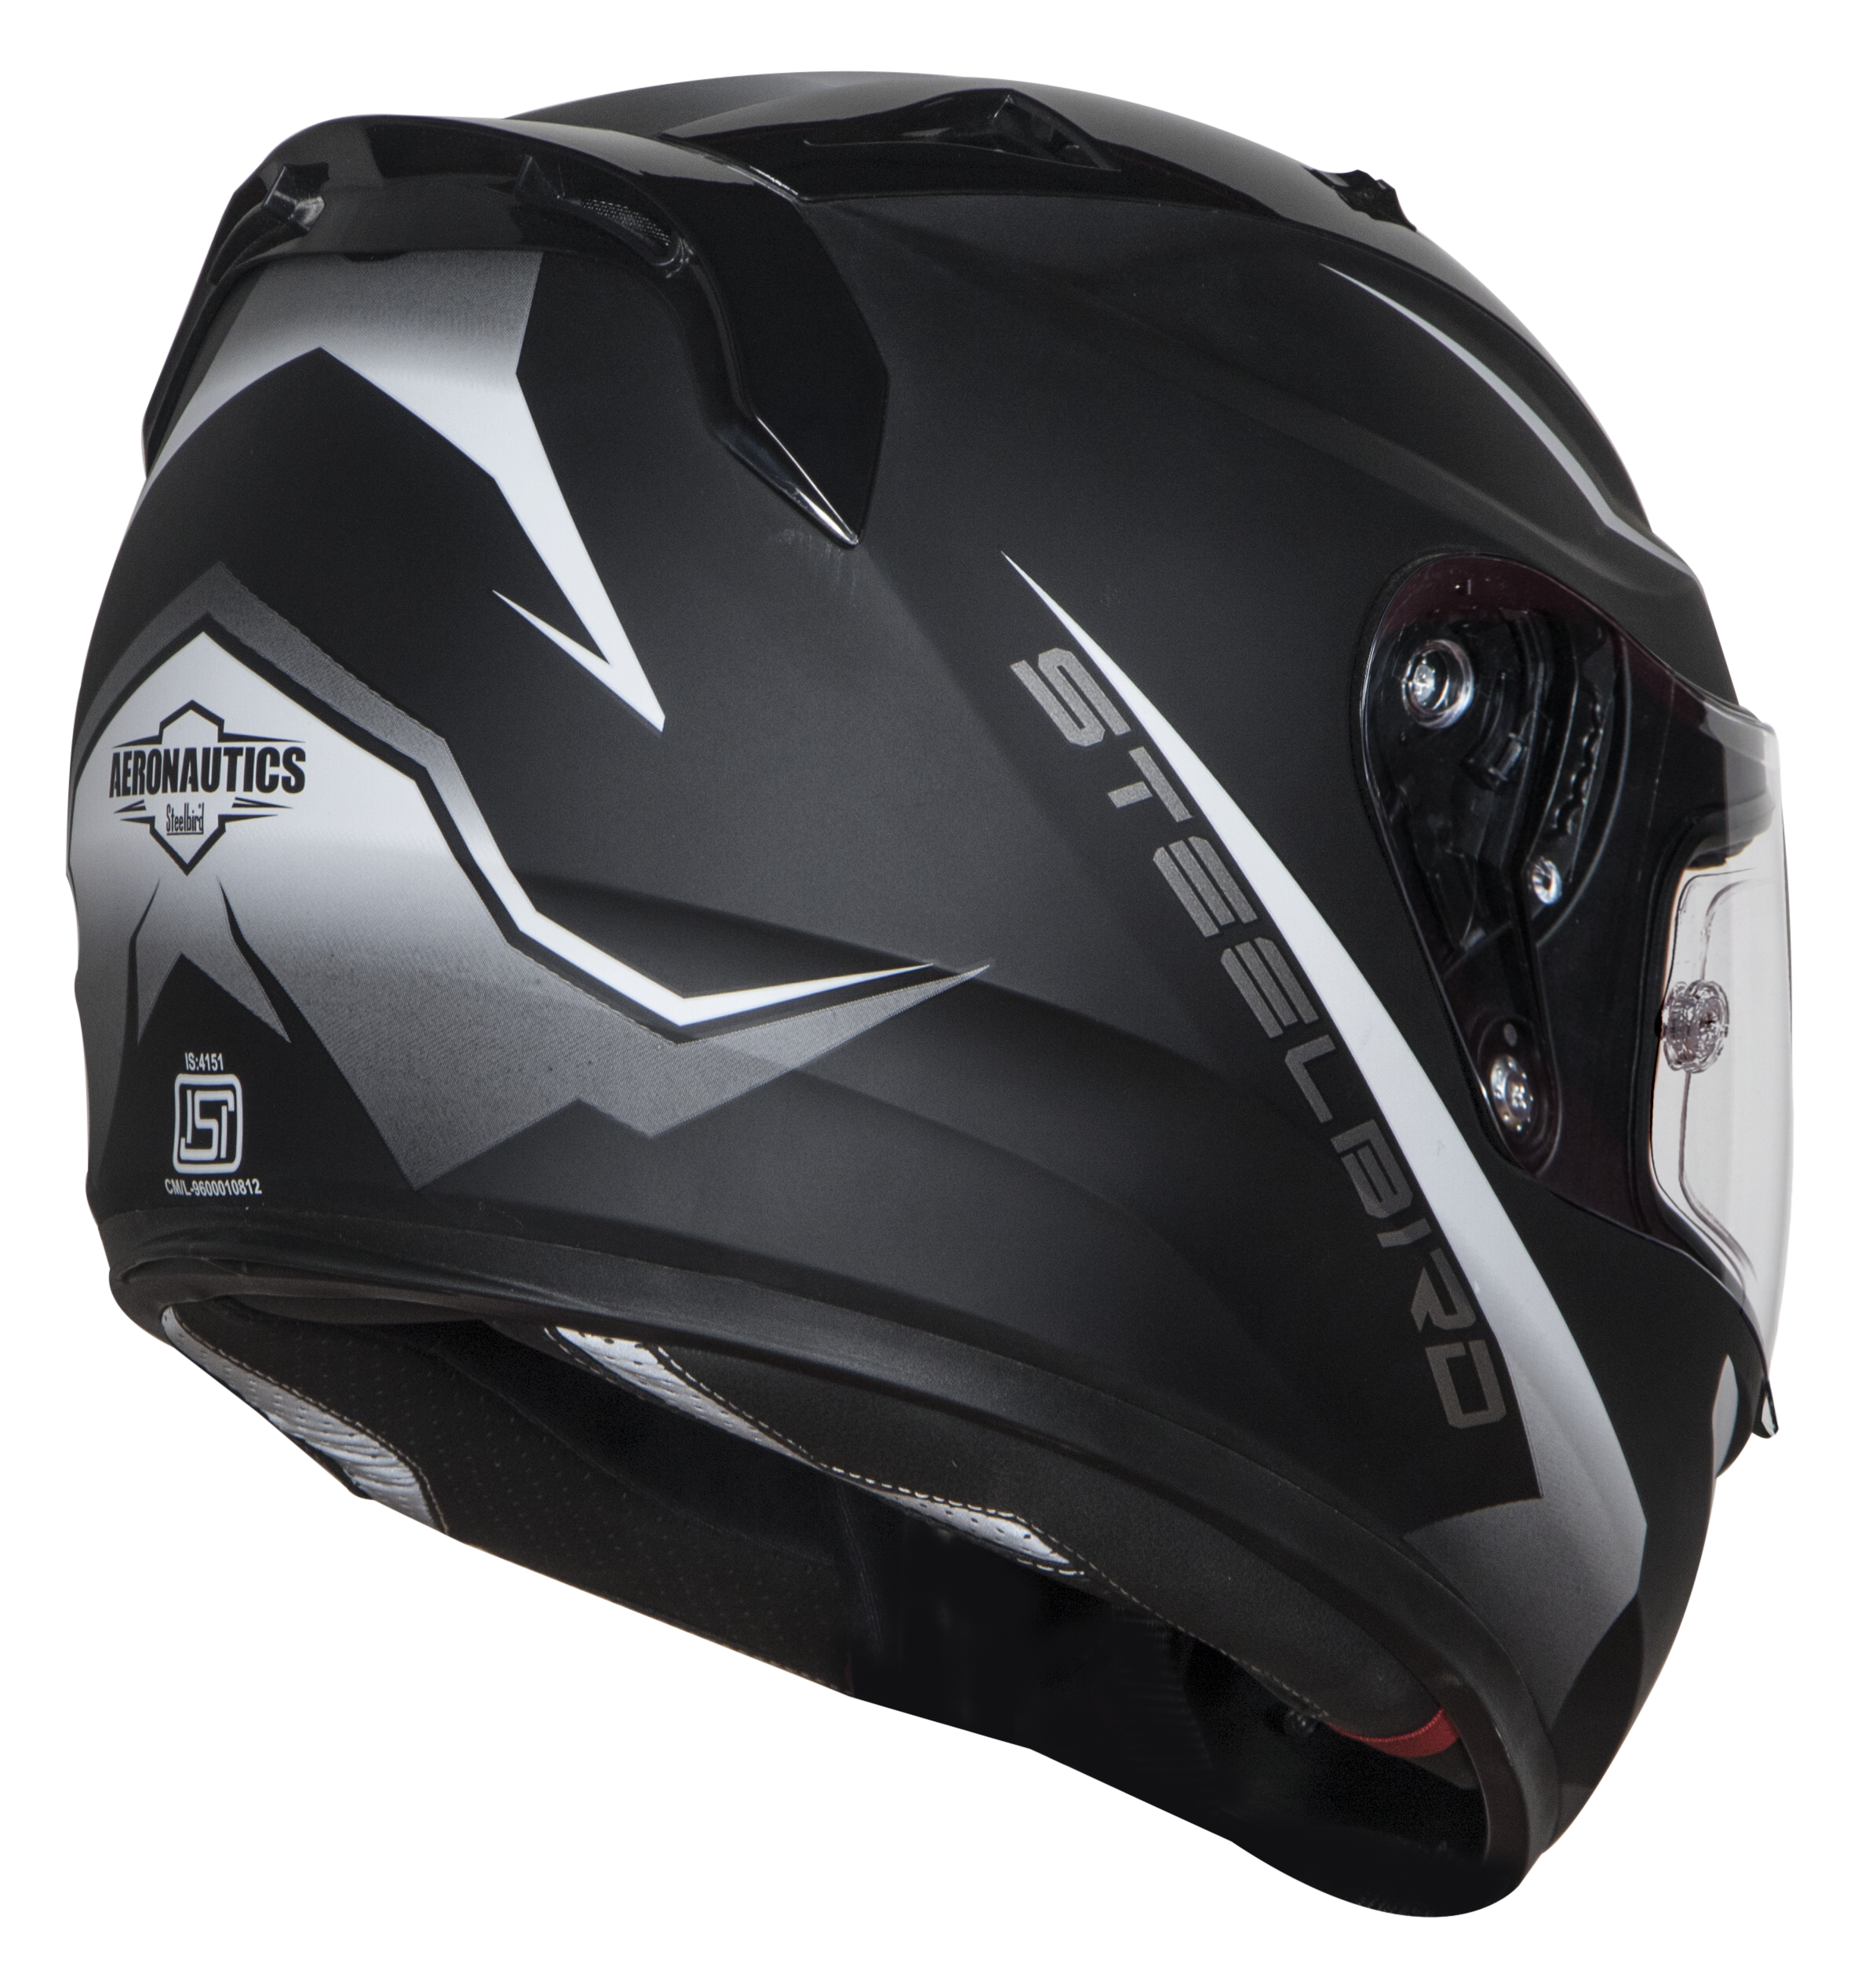 SA-1 WHIF Mat Black/White (Fitted With Clear Visor Extra Anti-Fog Shield Green Night Vision Photochromic Visor Free)